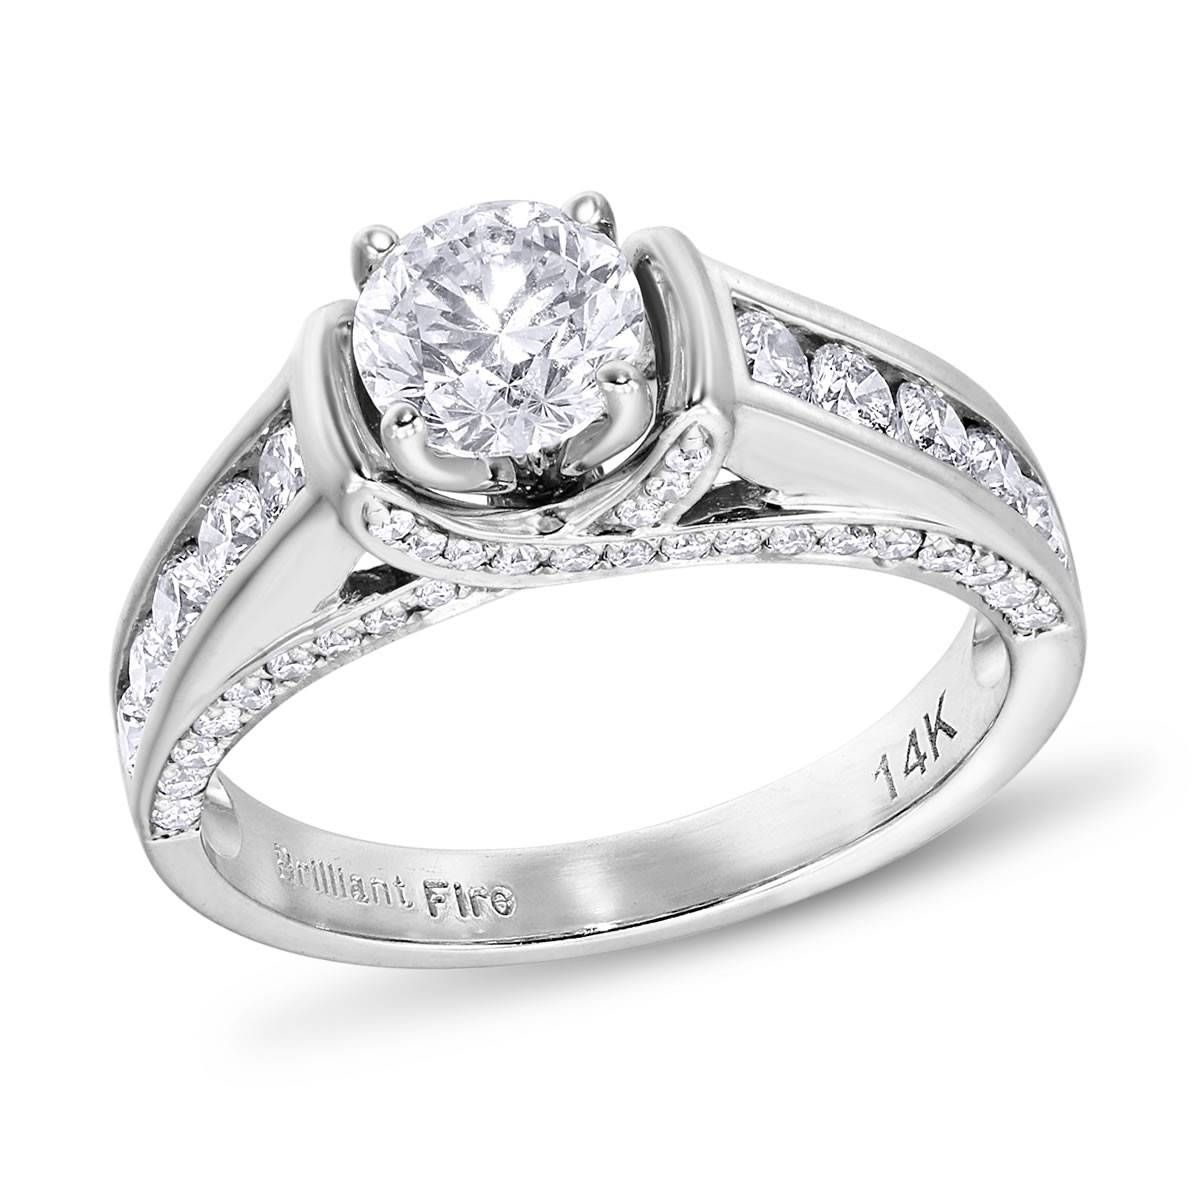 Ring Halo Setting Engagement Ring Irish Wedding Rings How To Wear Regarding Quirky Wedding Rings (View 12 of 15)